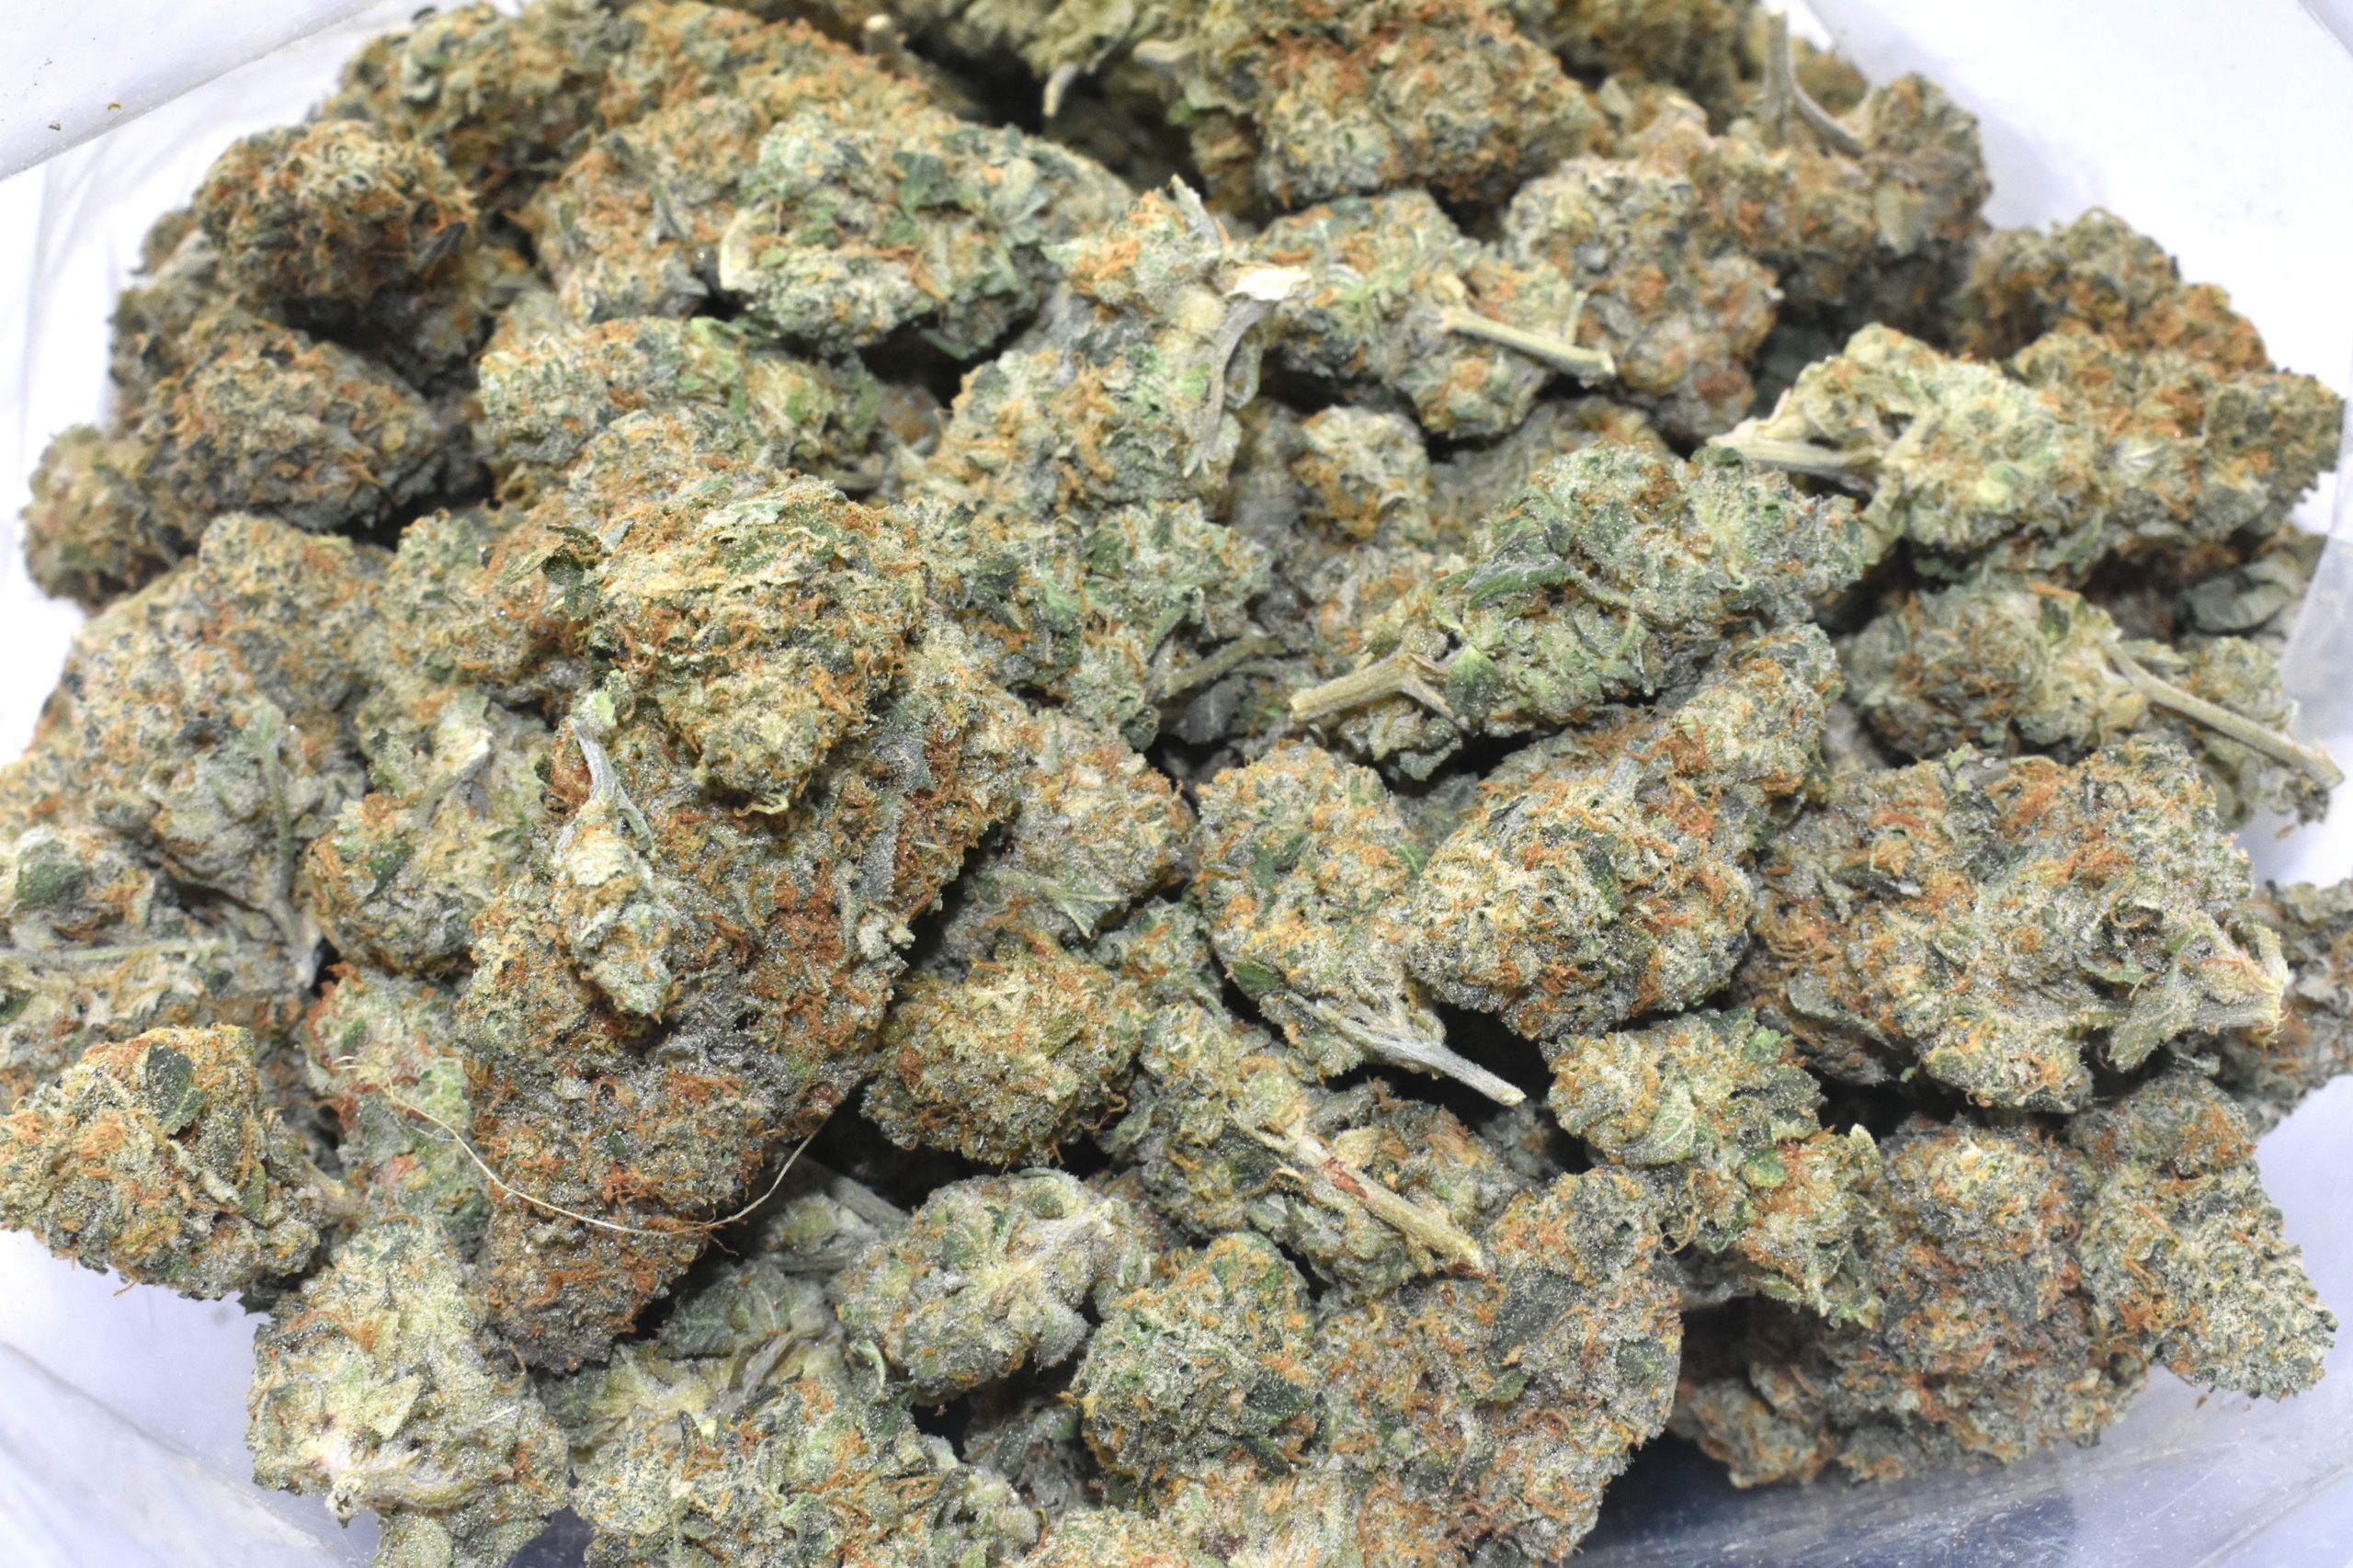 buy-guava-cake-online-at-chronicfarms.cc-weed-dispensary